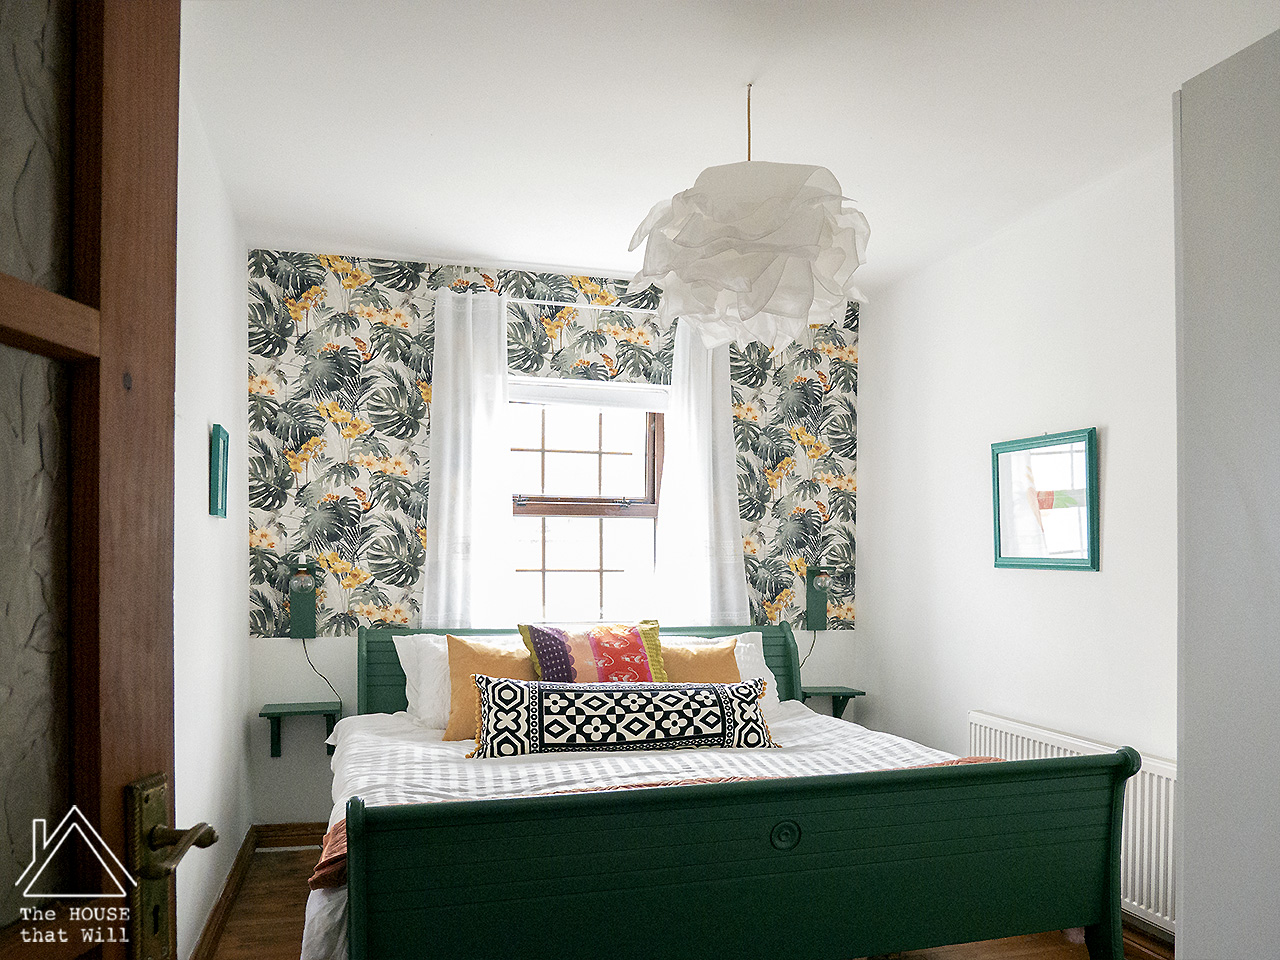 The House that Will | Budget Decor: €125 Master Bedroom